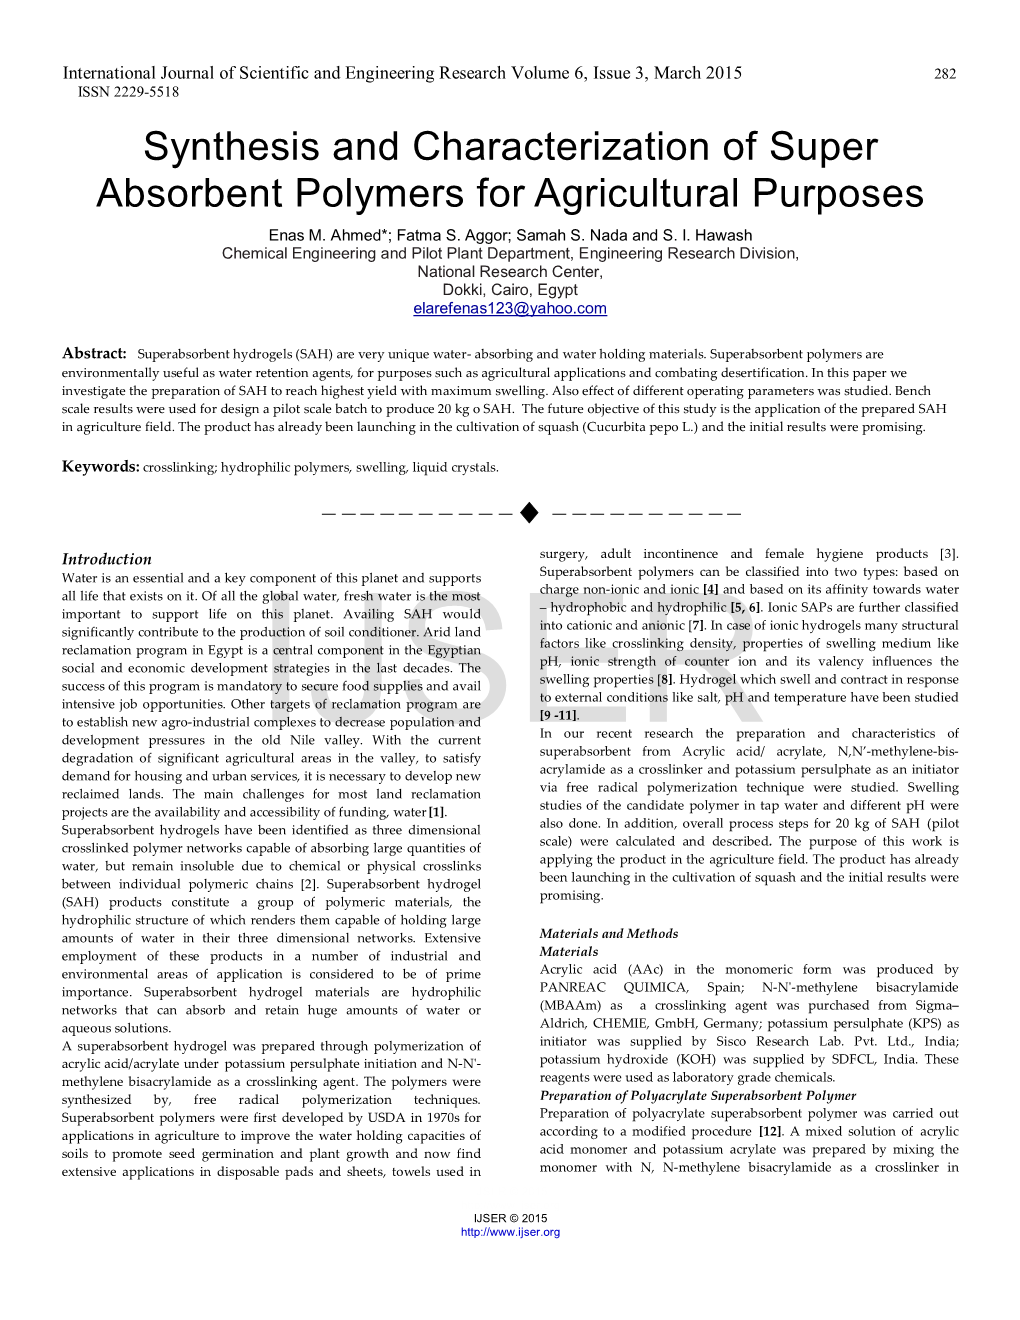 Synthesis and Characterization of Super Absorbent Polymers for Agricultural Purposes Enas M